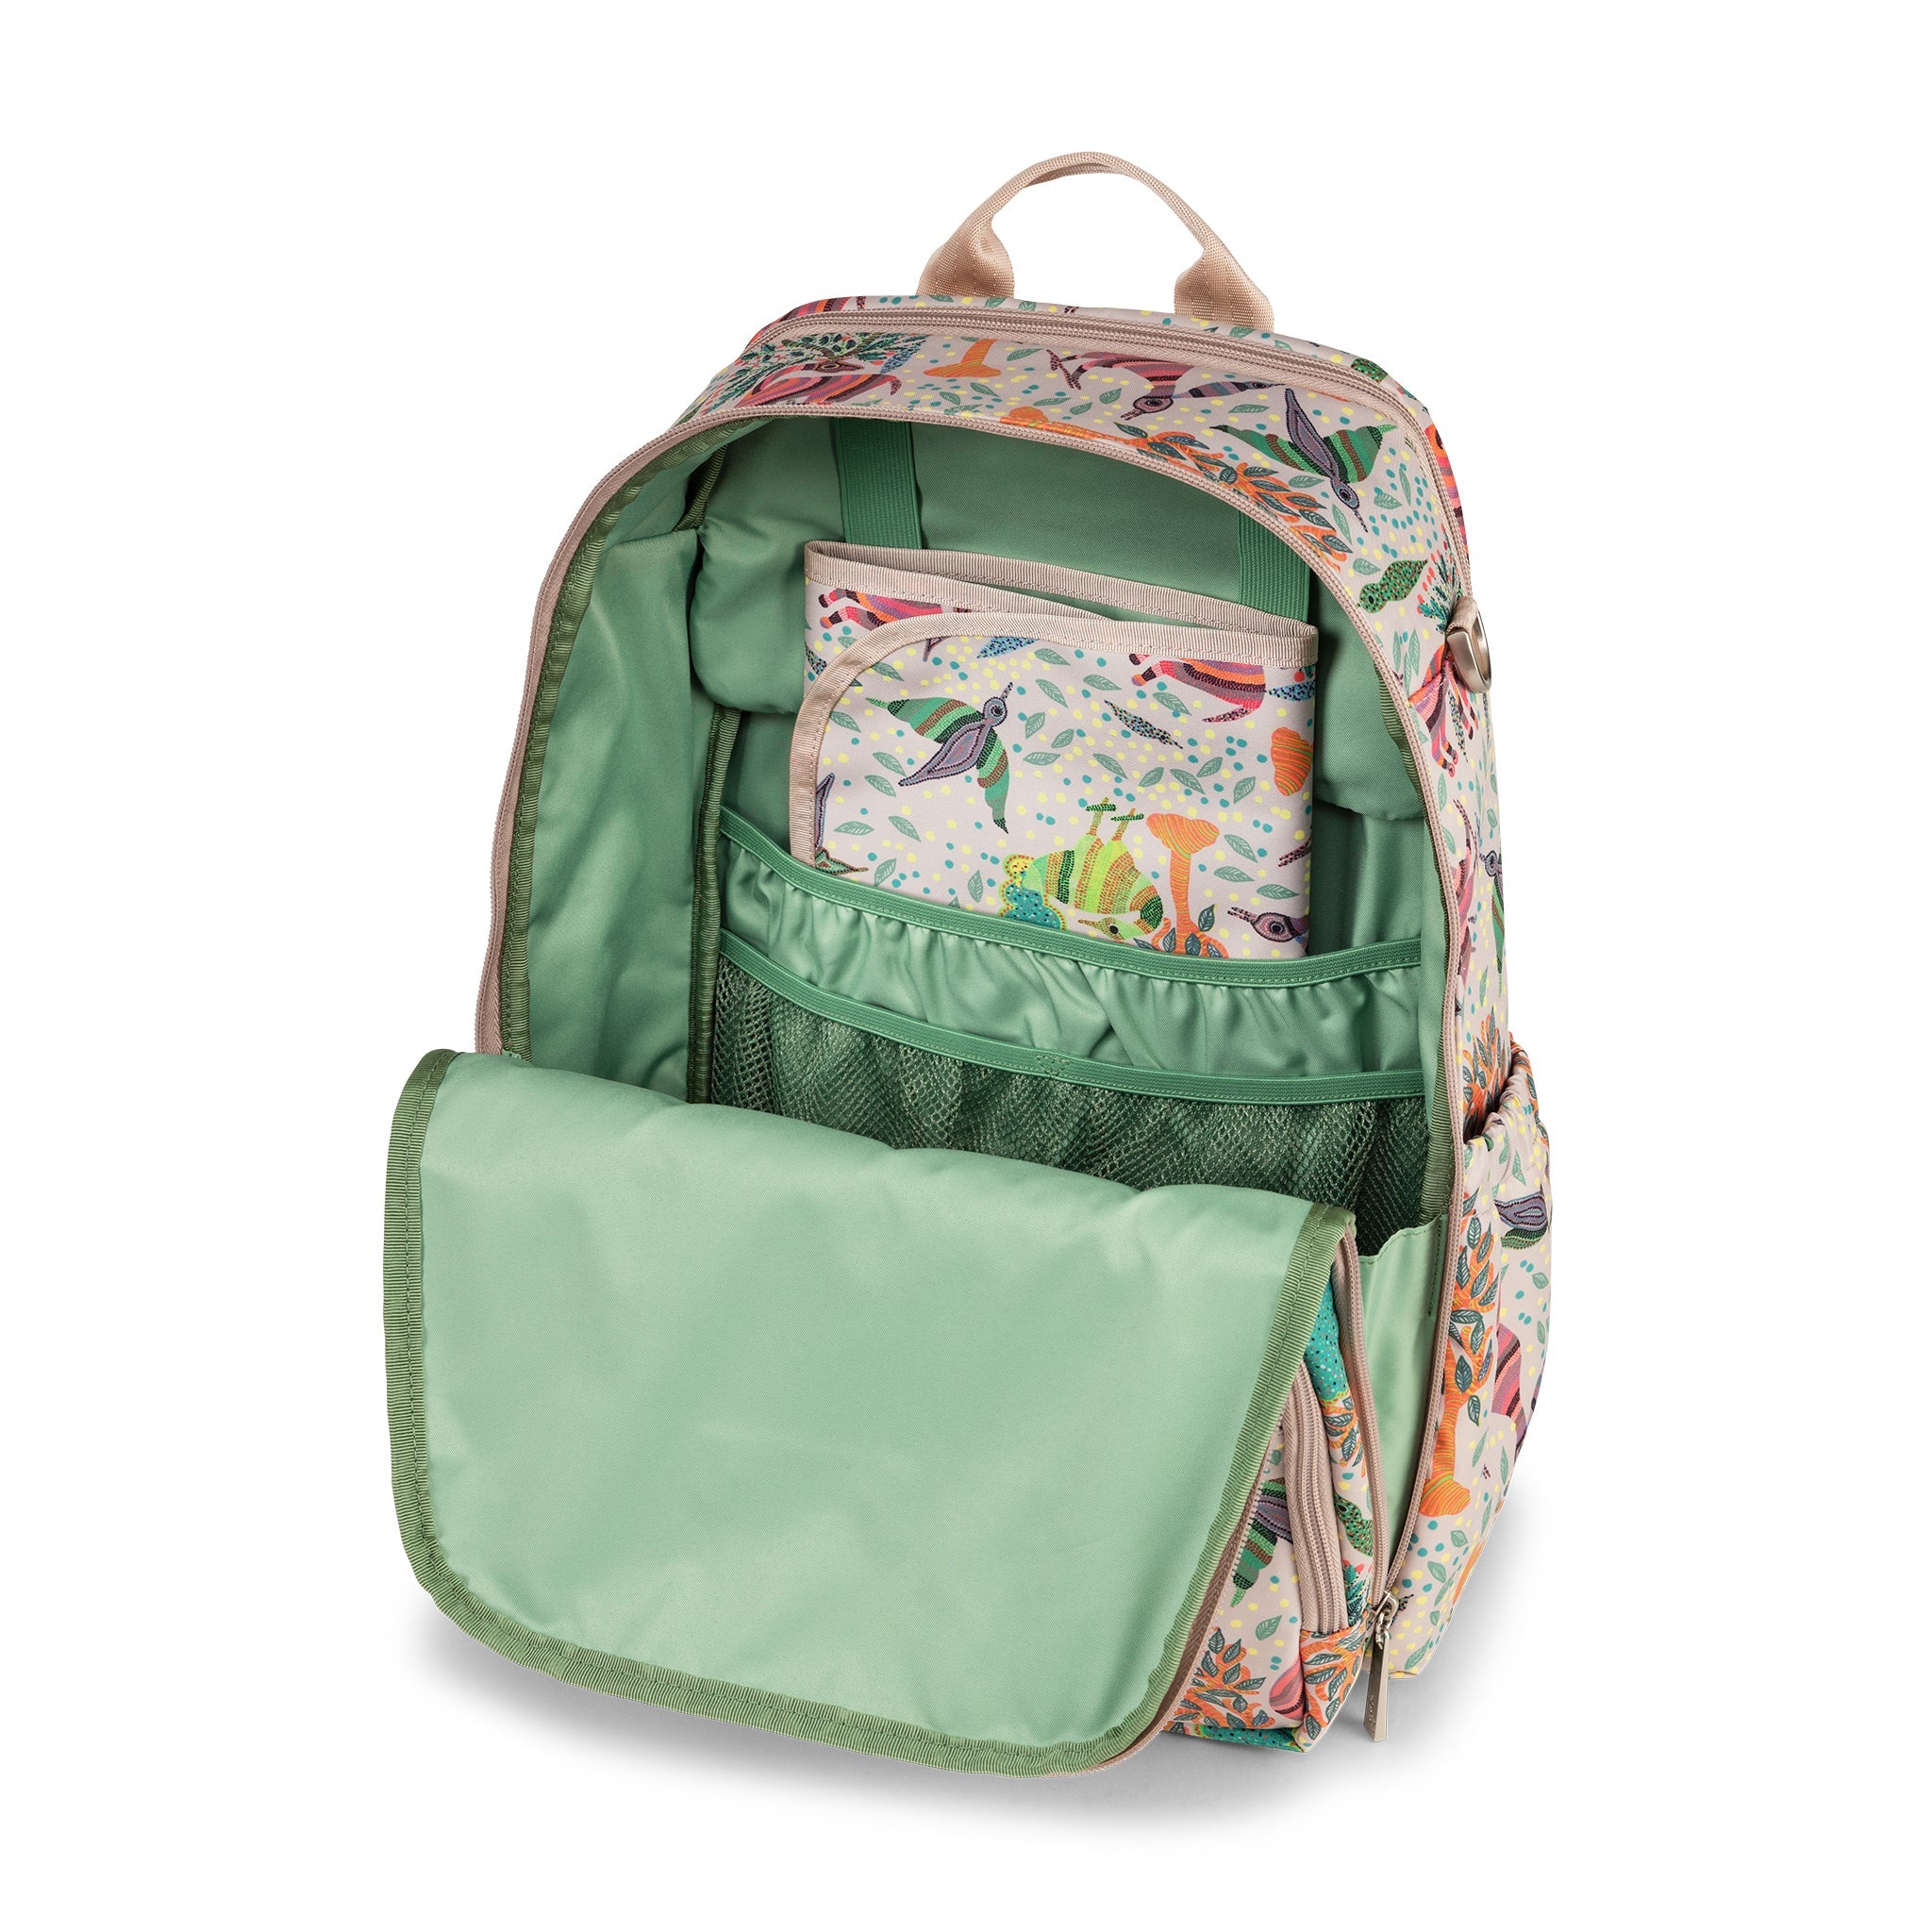 Zealous Backpack - Wild Life by Roots Studio - SuperMom Headquarters